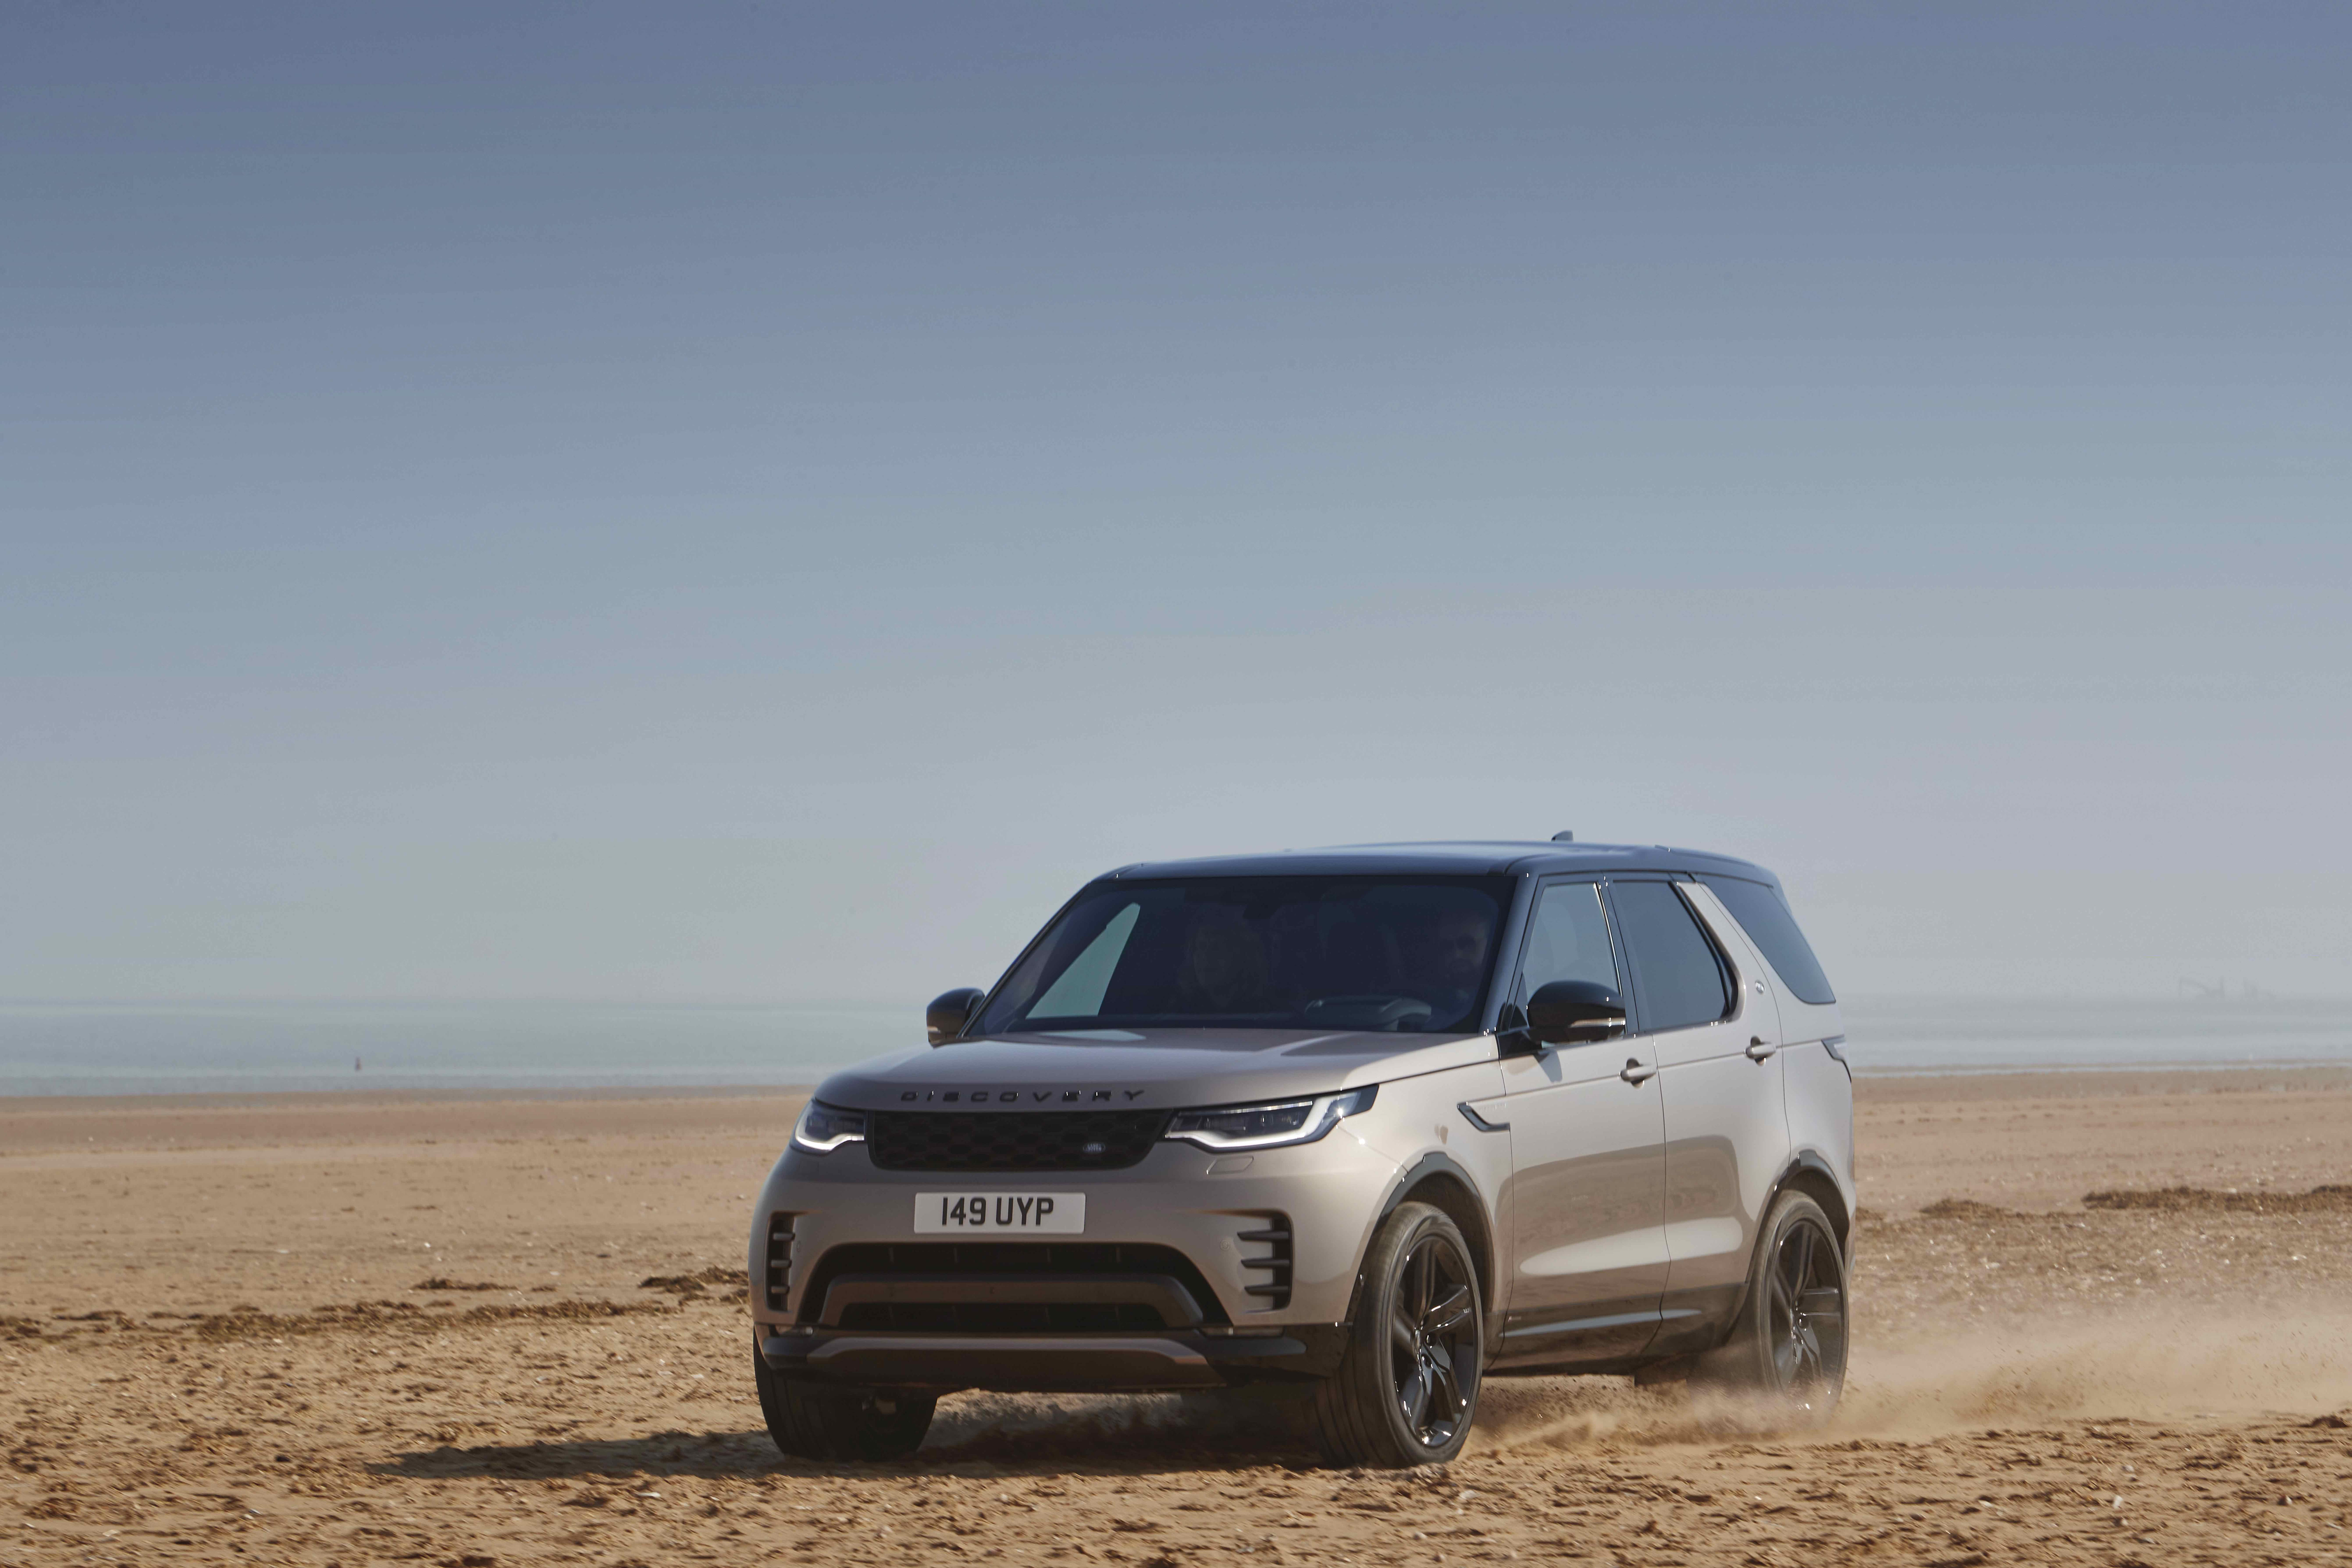 Дискавери 2018. Land Rover Discovery 2021. Ленд Ровер Дискавери 5 2021. Land Rover Discovery 5 2022. Новый ленд Ровер Дискавери 2022.